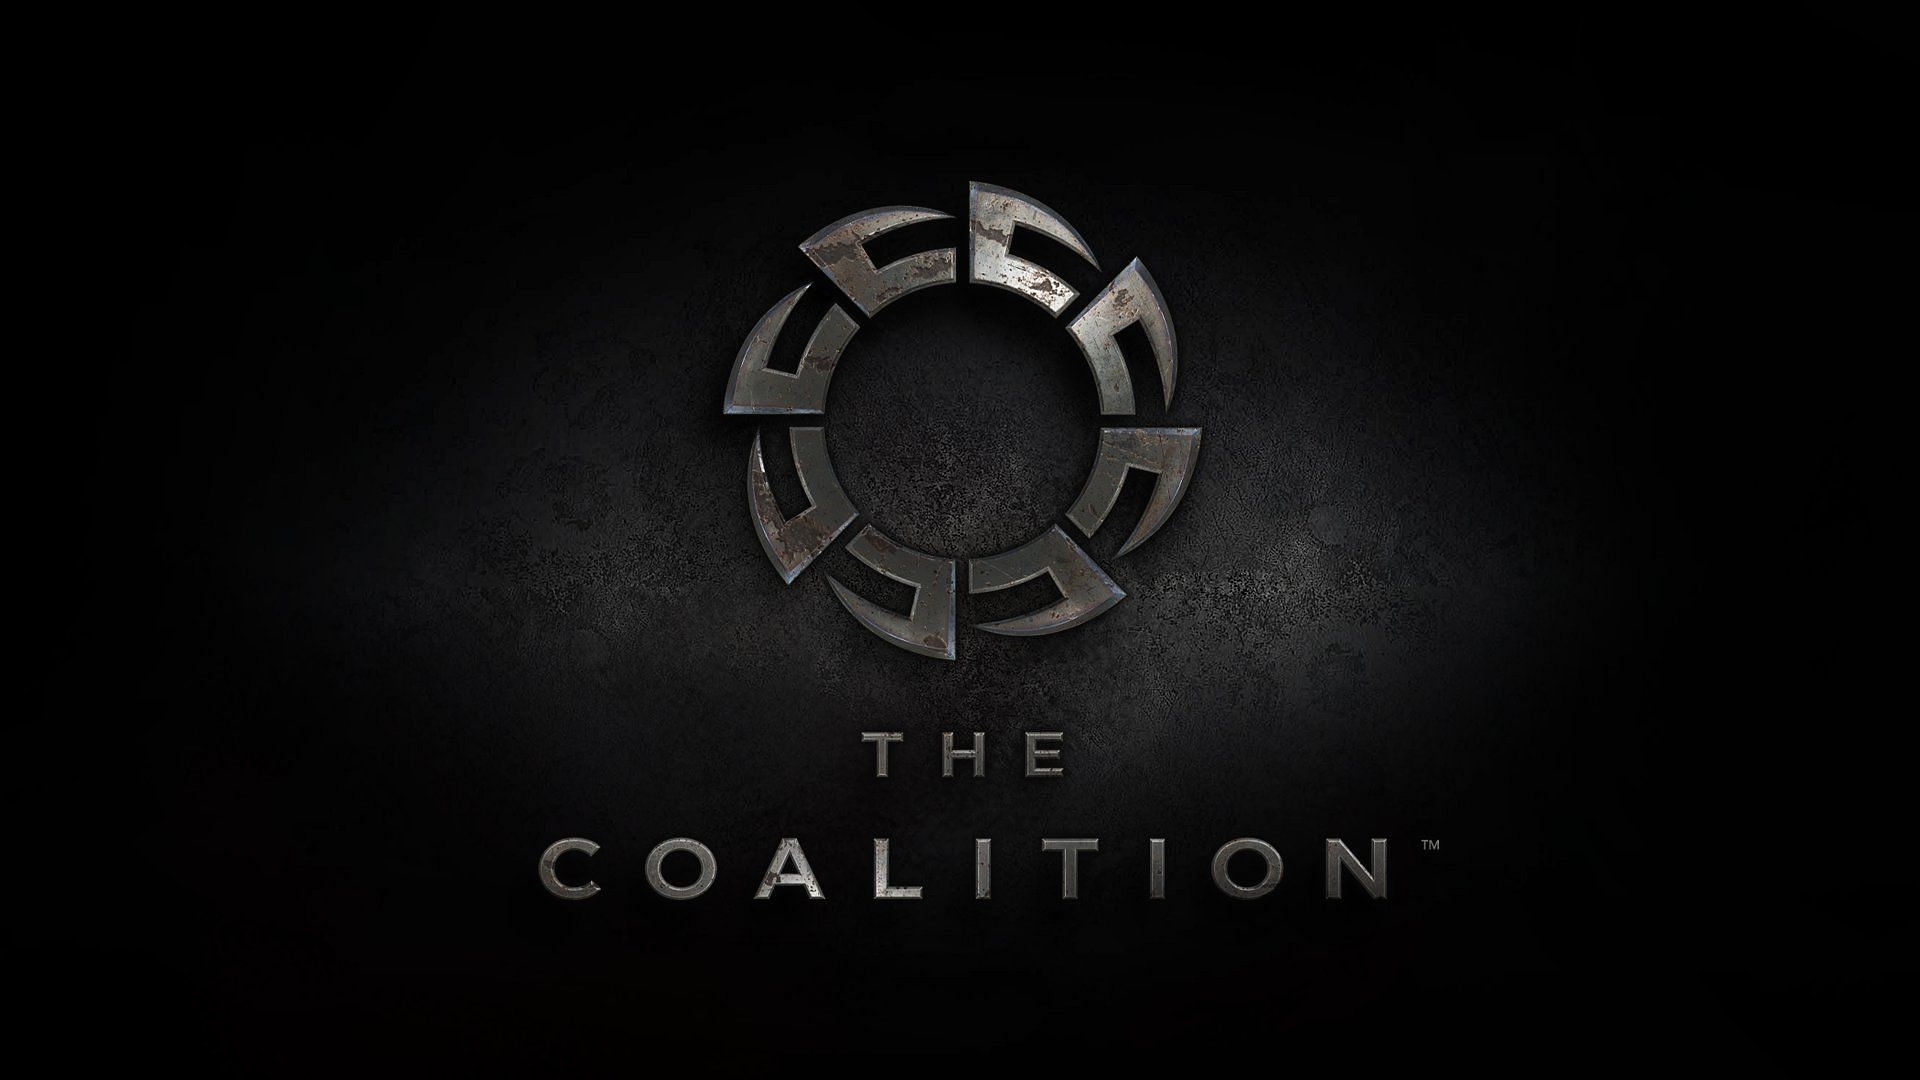 Since Gears of War 4, The Coalition has solely worked on Gears of War titles (Image via Twitter/CoalitionGears)